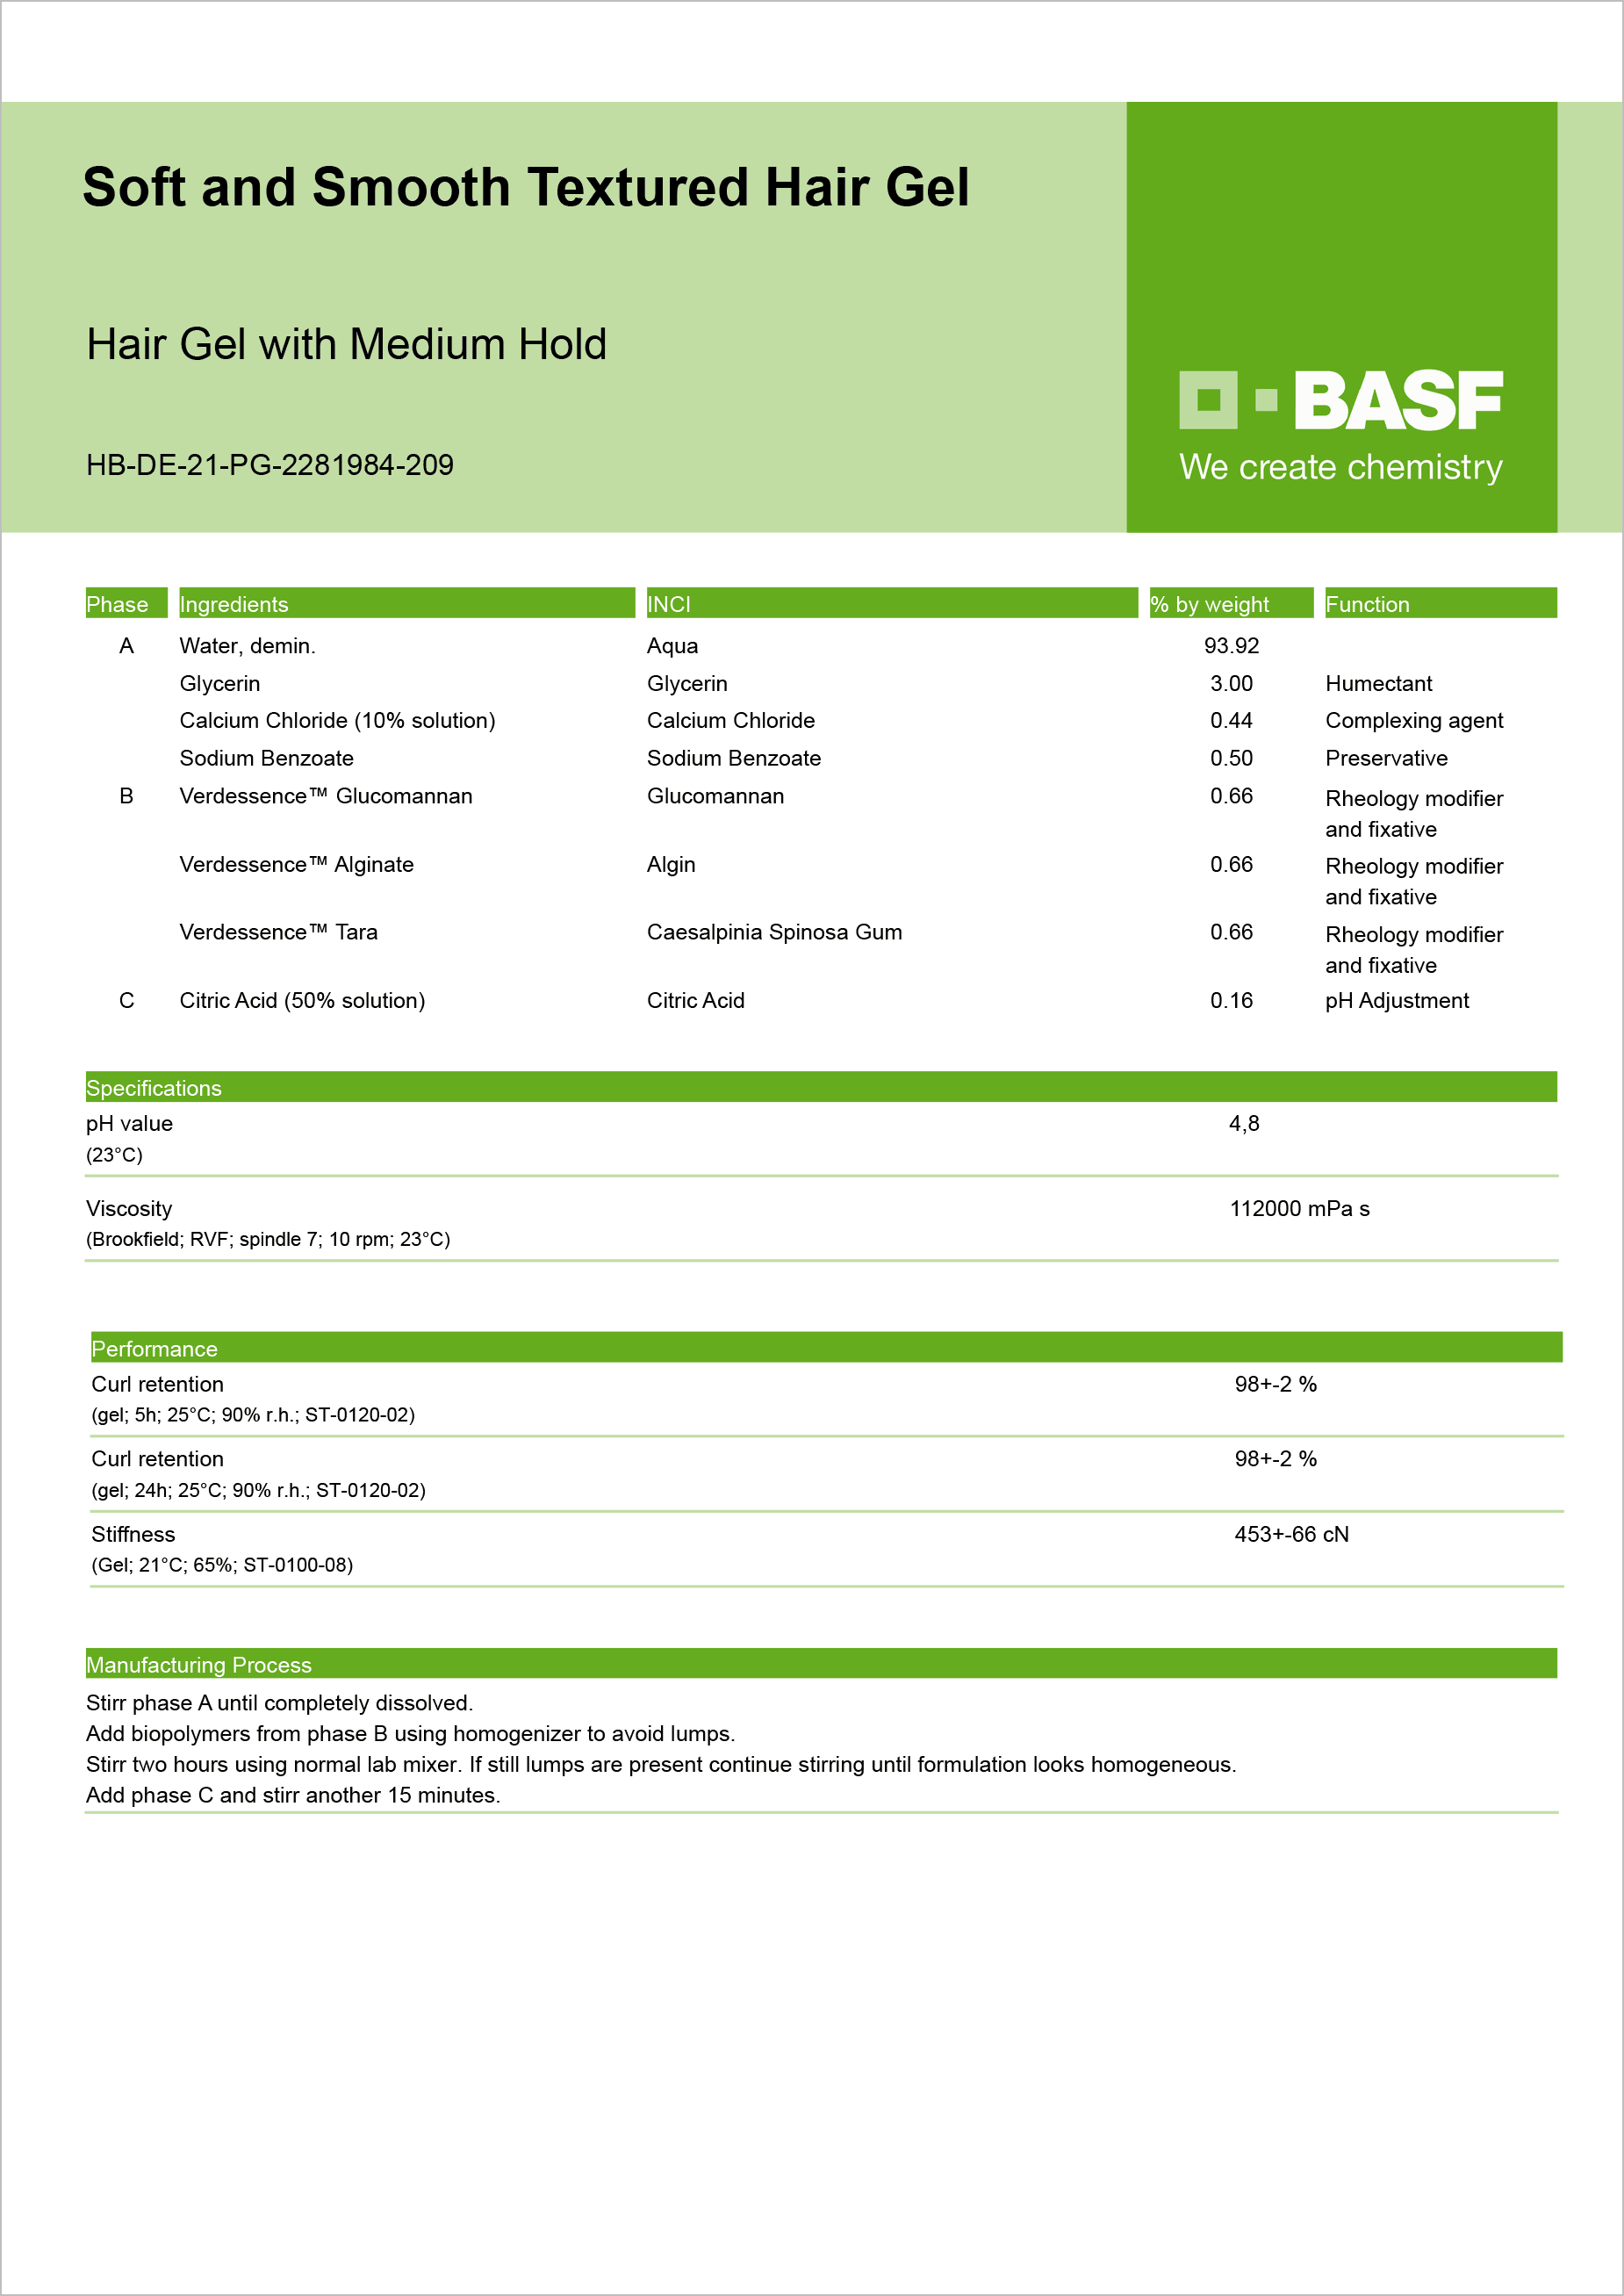 BASF Formulation Soft and Smooth Textured Hair Gel